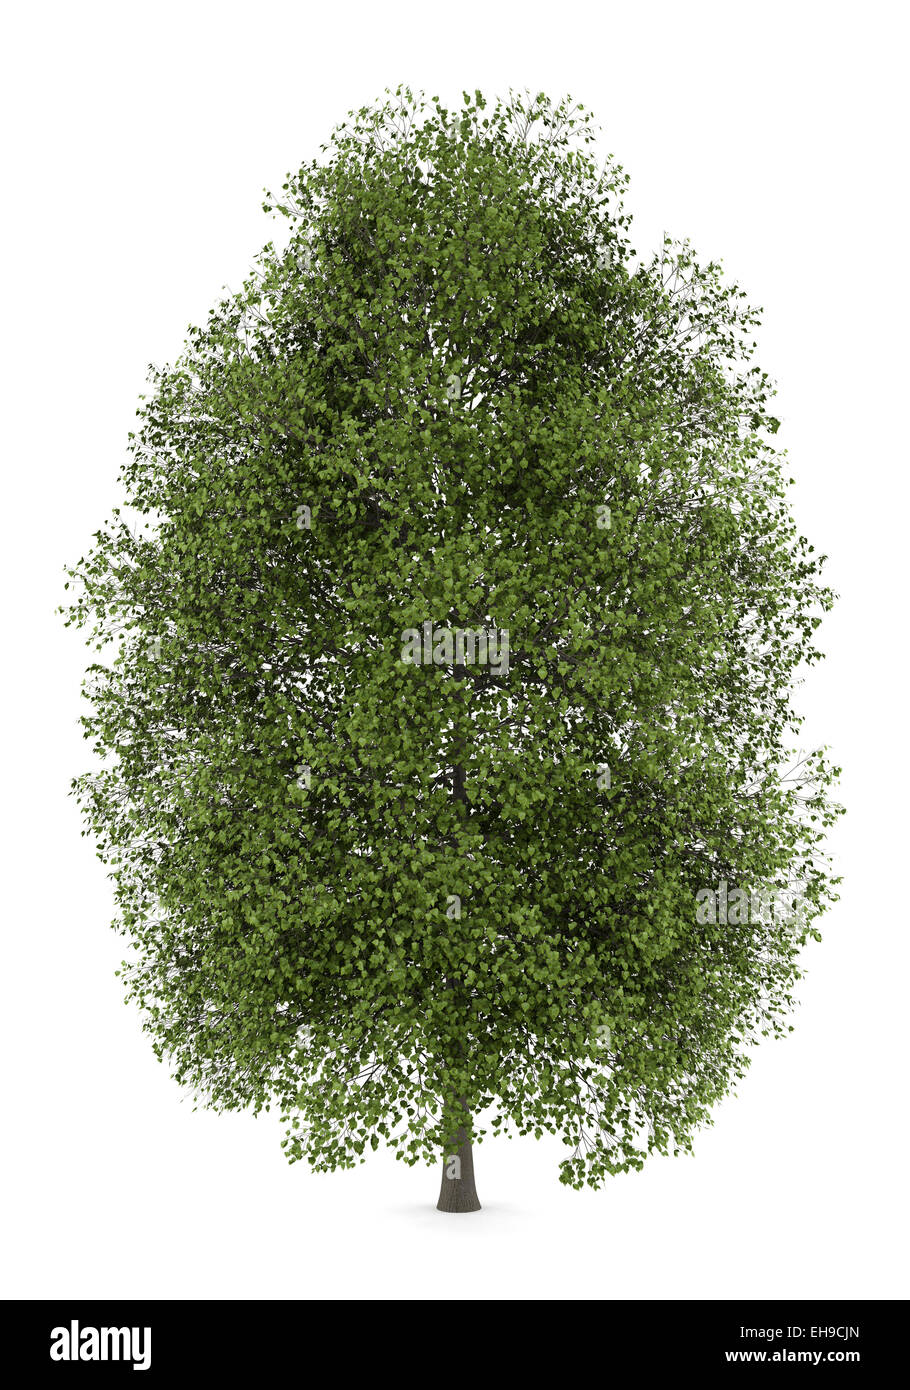 small-leaved lime tree isolated on white background Stock Photo